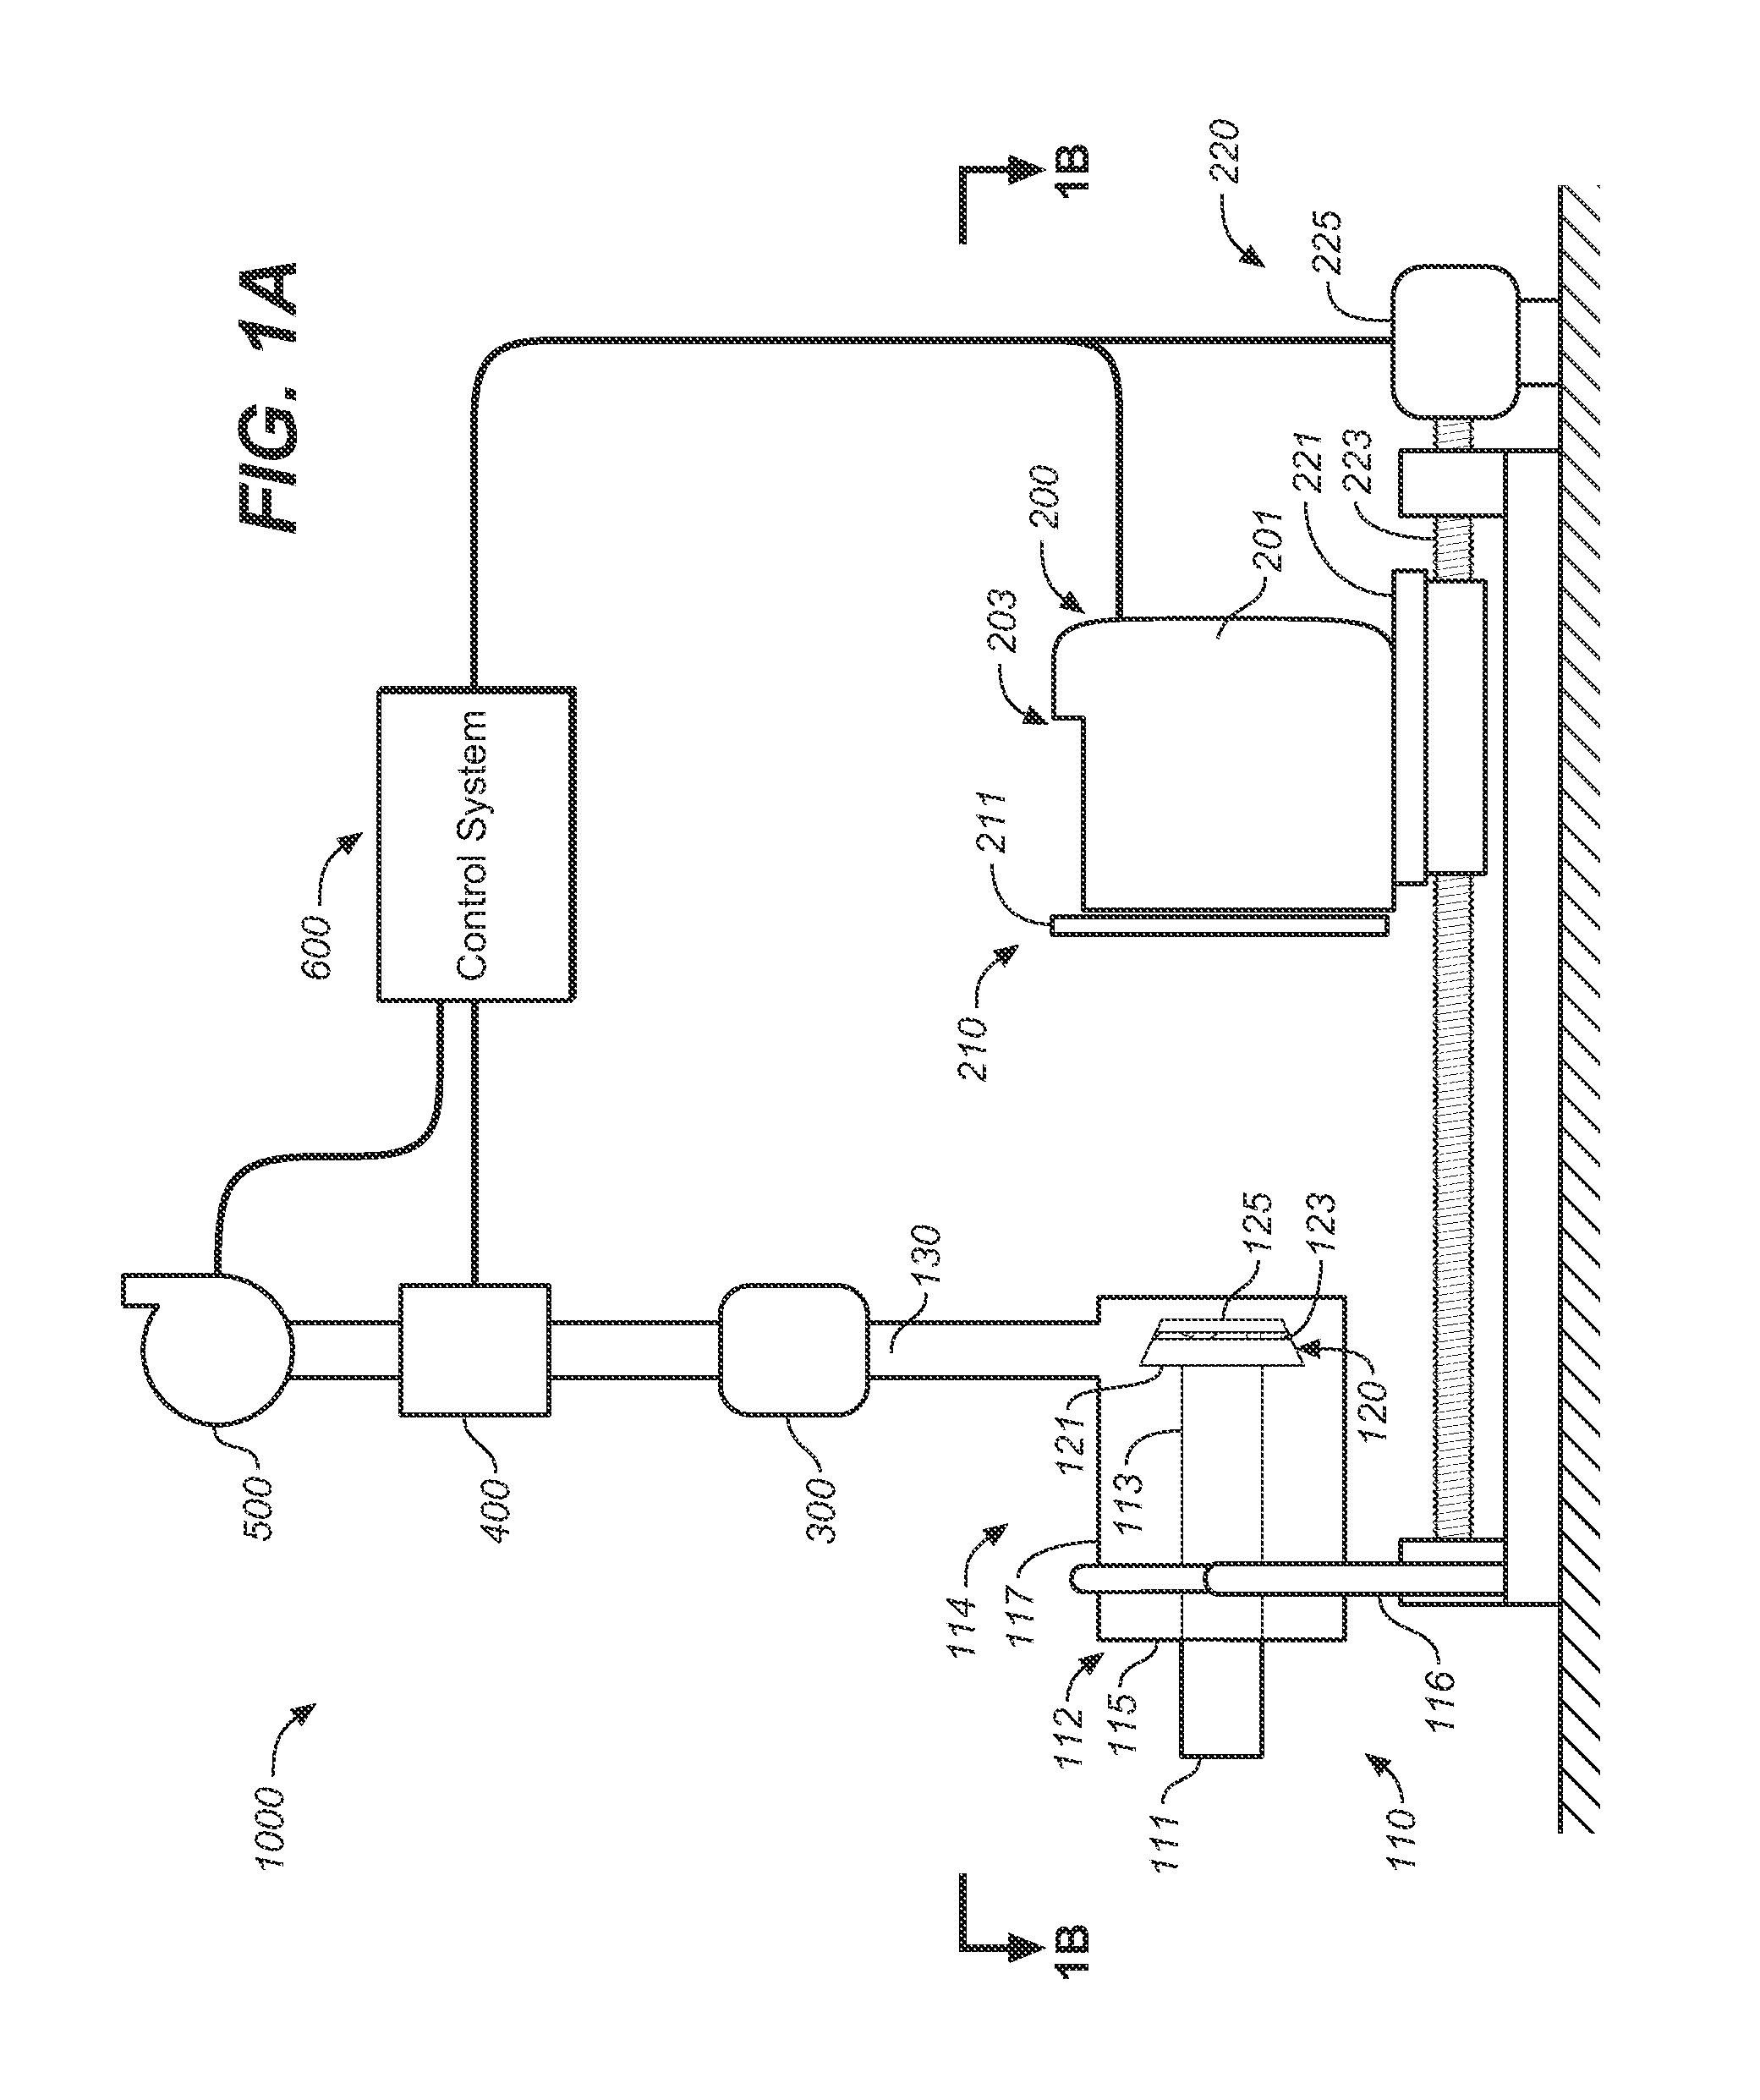 Method and analyzer for determining the content of carbon-containing particles filtered from an air stream